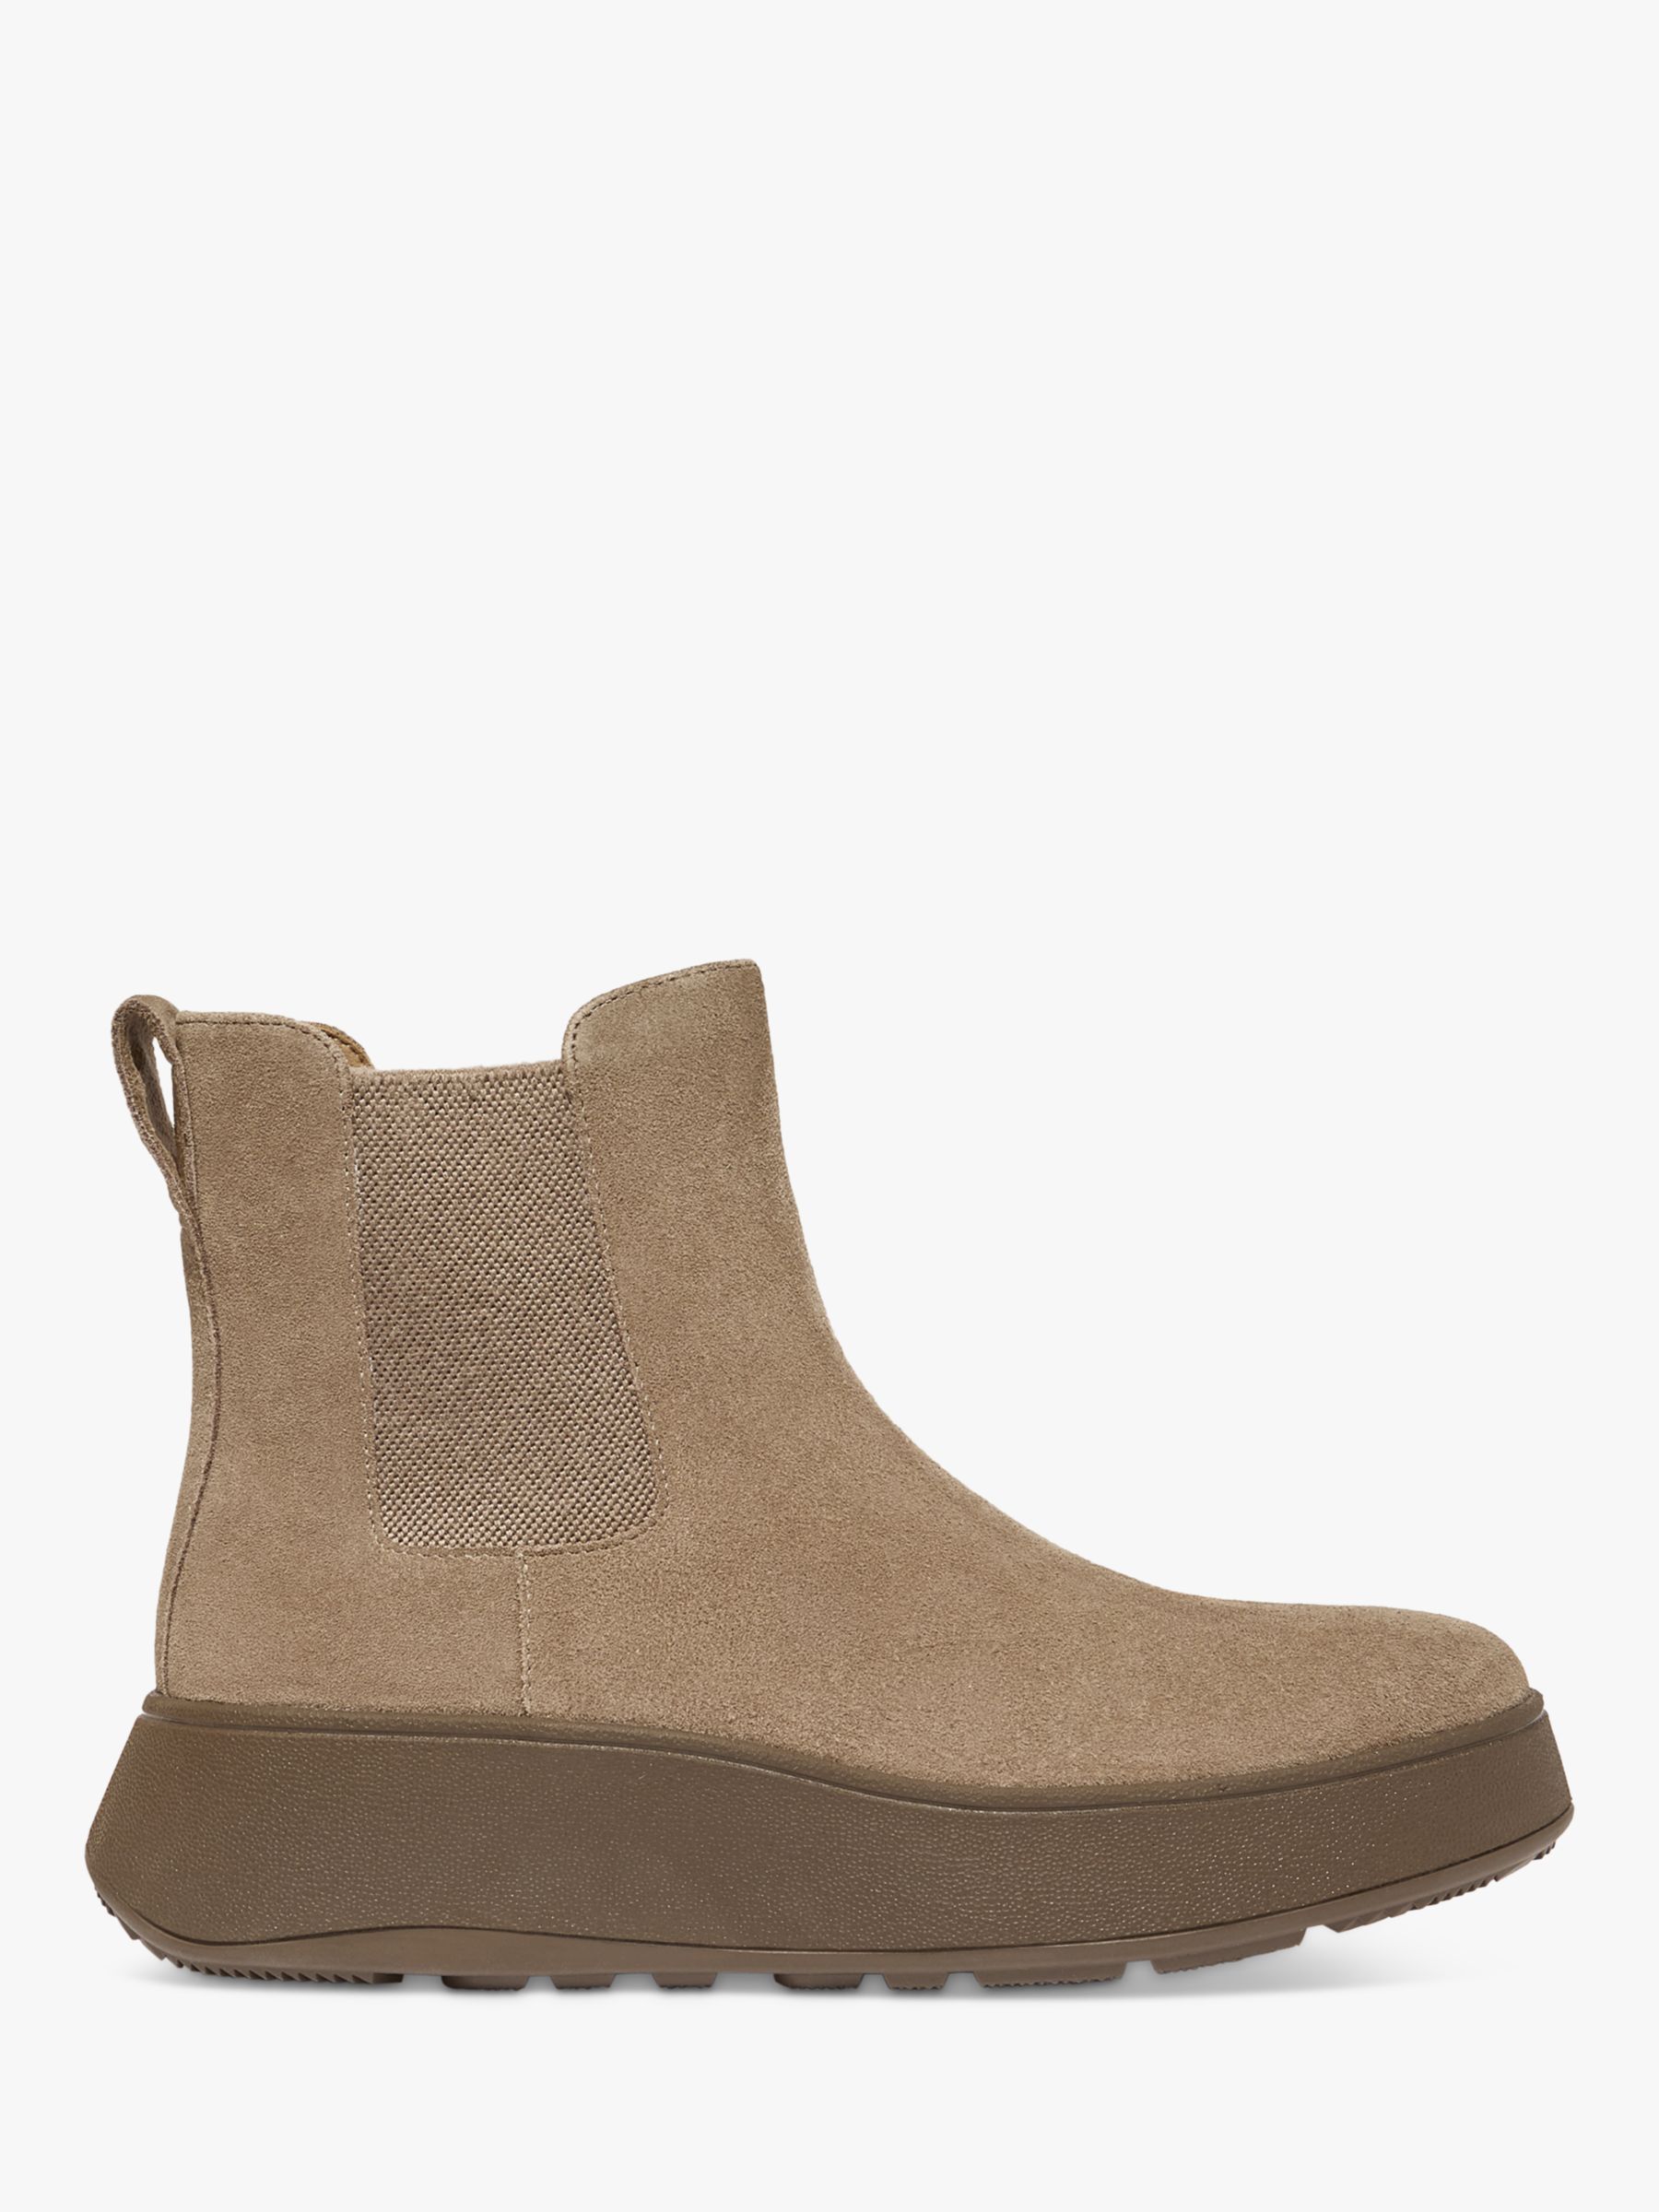 FitFlop F-Mode Suede Chelsea Boots, Minky Grey at John Lewis & Partners